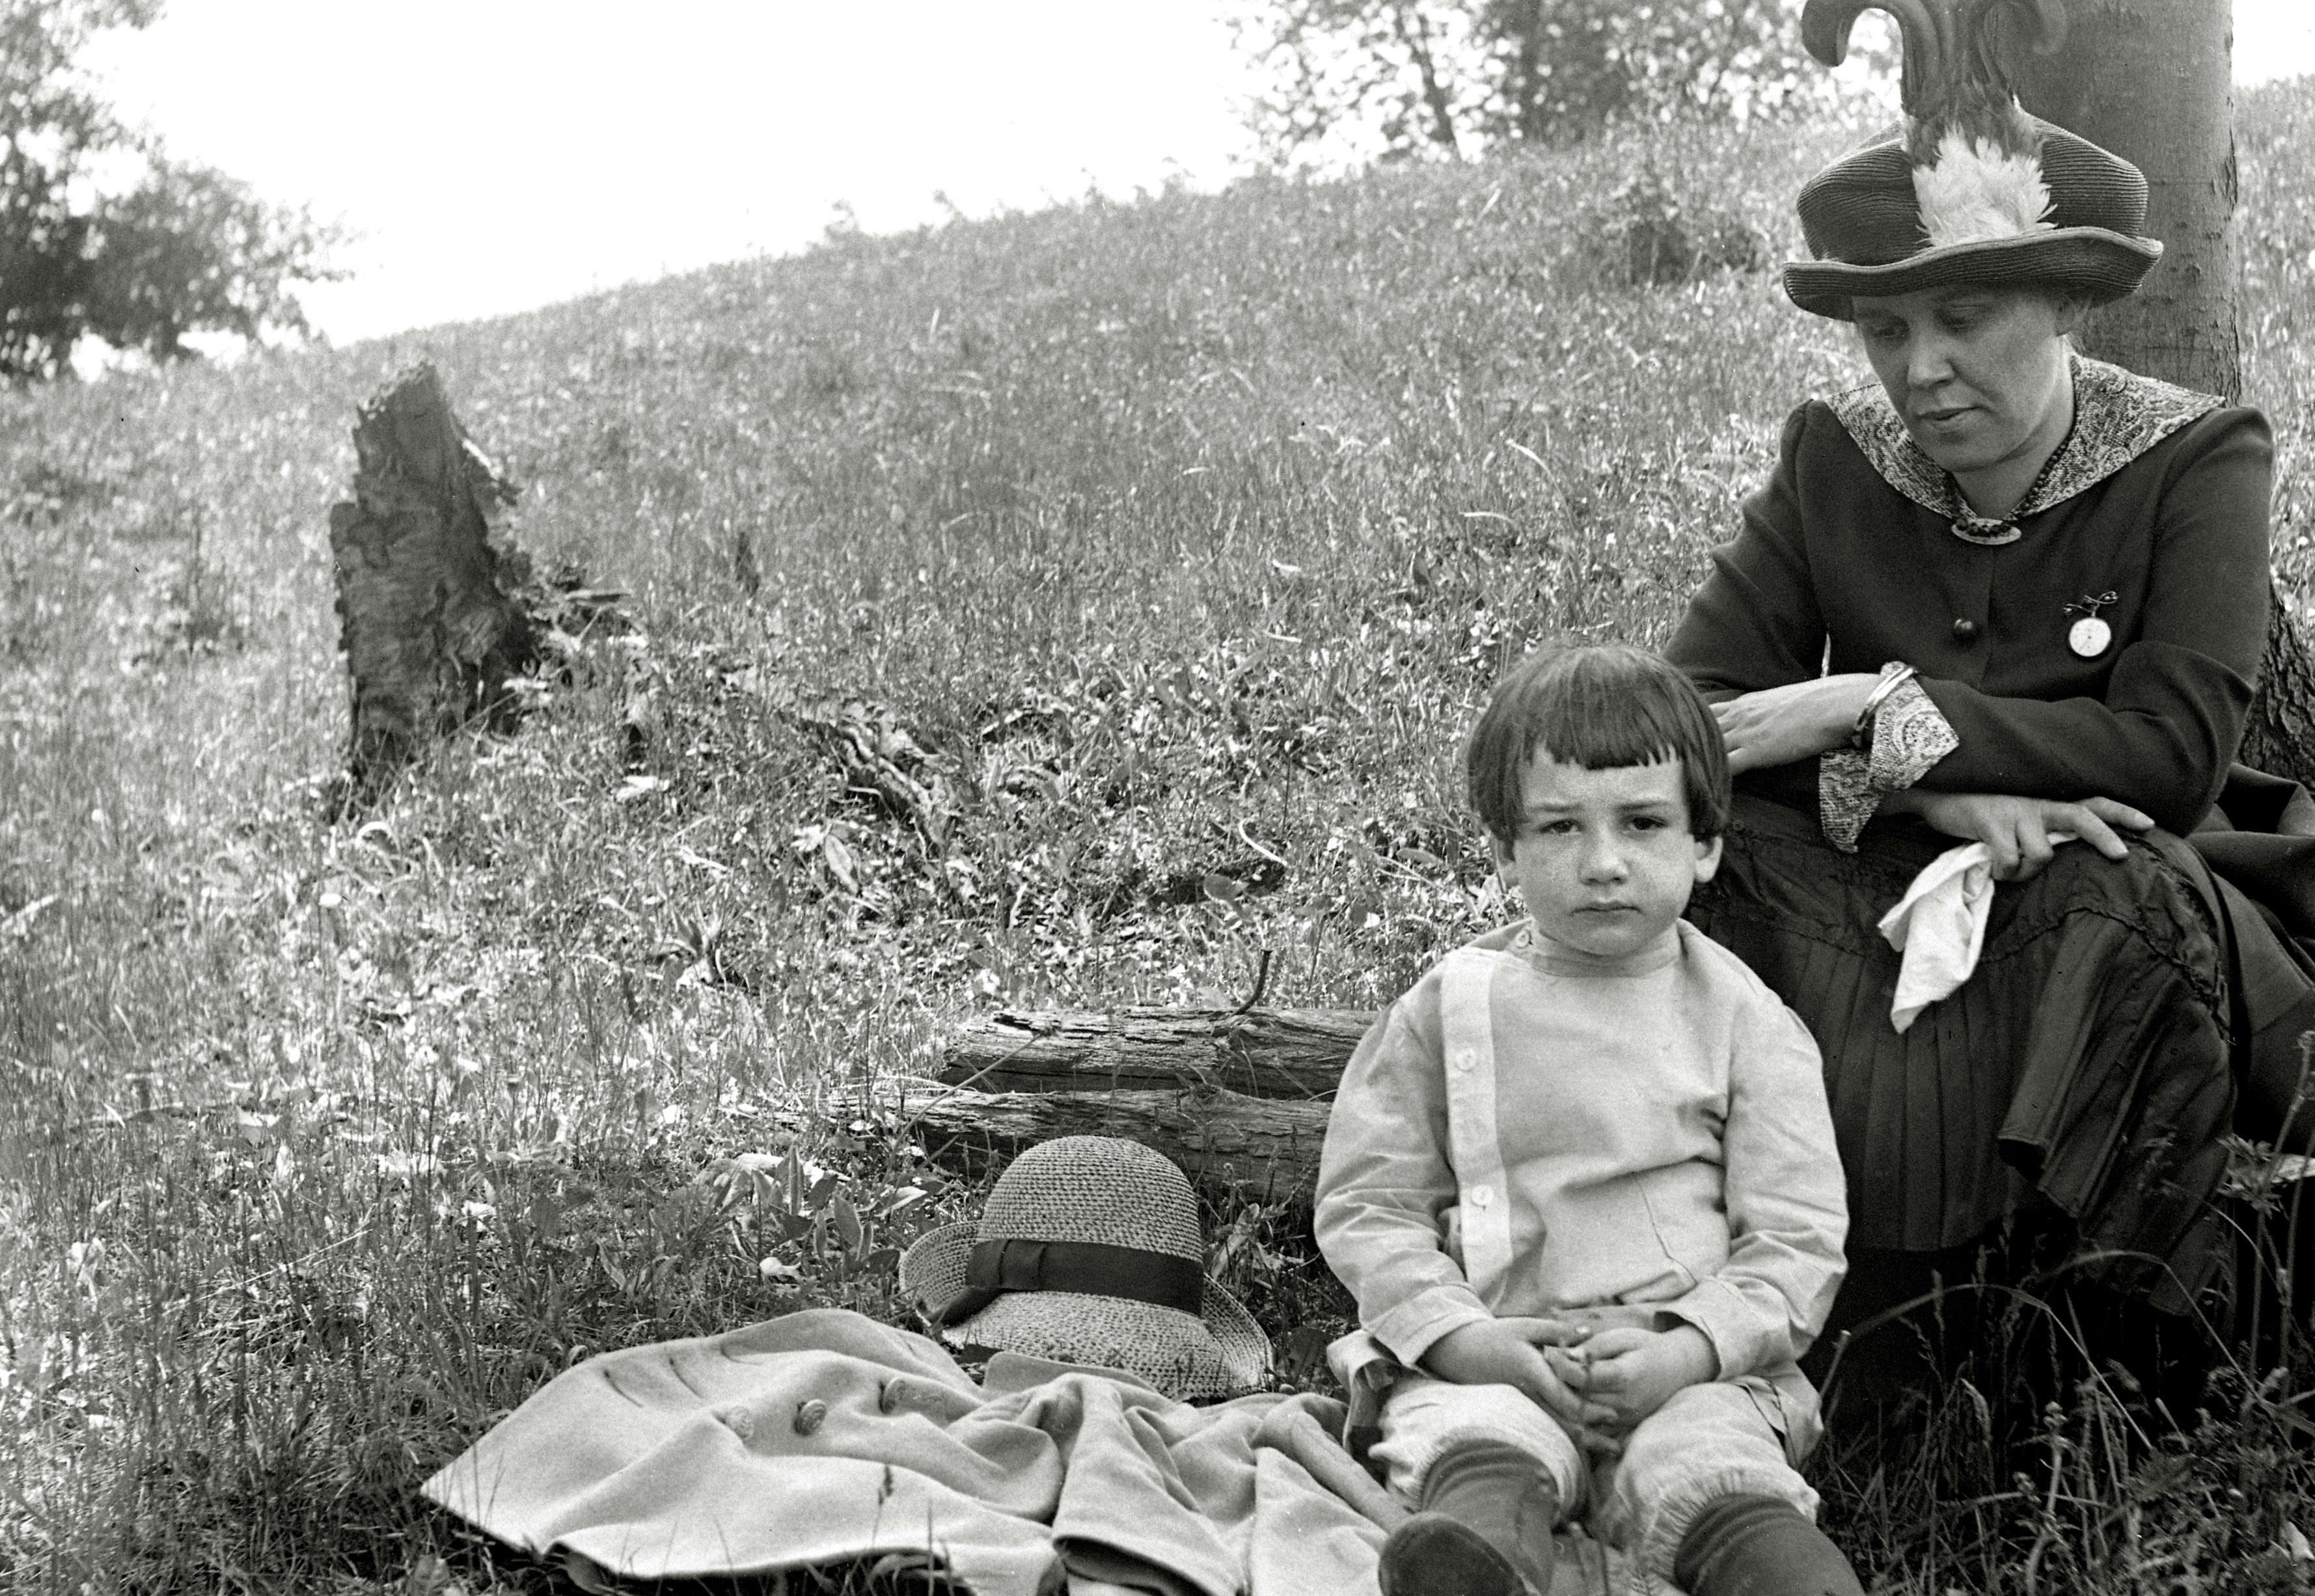 From the collection of film and 4x5 glass negatives I recently purchased; they seem to be circa 1912, taken in upstate New York. This is one of my favorites.  The love and pride are evident. It occurred to me, looking at this, was that this child is a contemporary of my father, who was born in 1908 and died three months after his 91st birthday in 2000, and I wondered about his life in that context.  It would be nice to have answers. View full size.